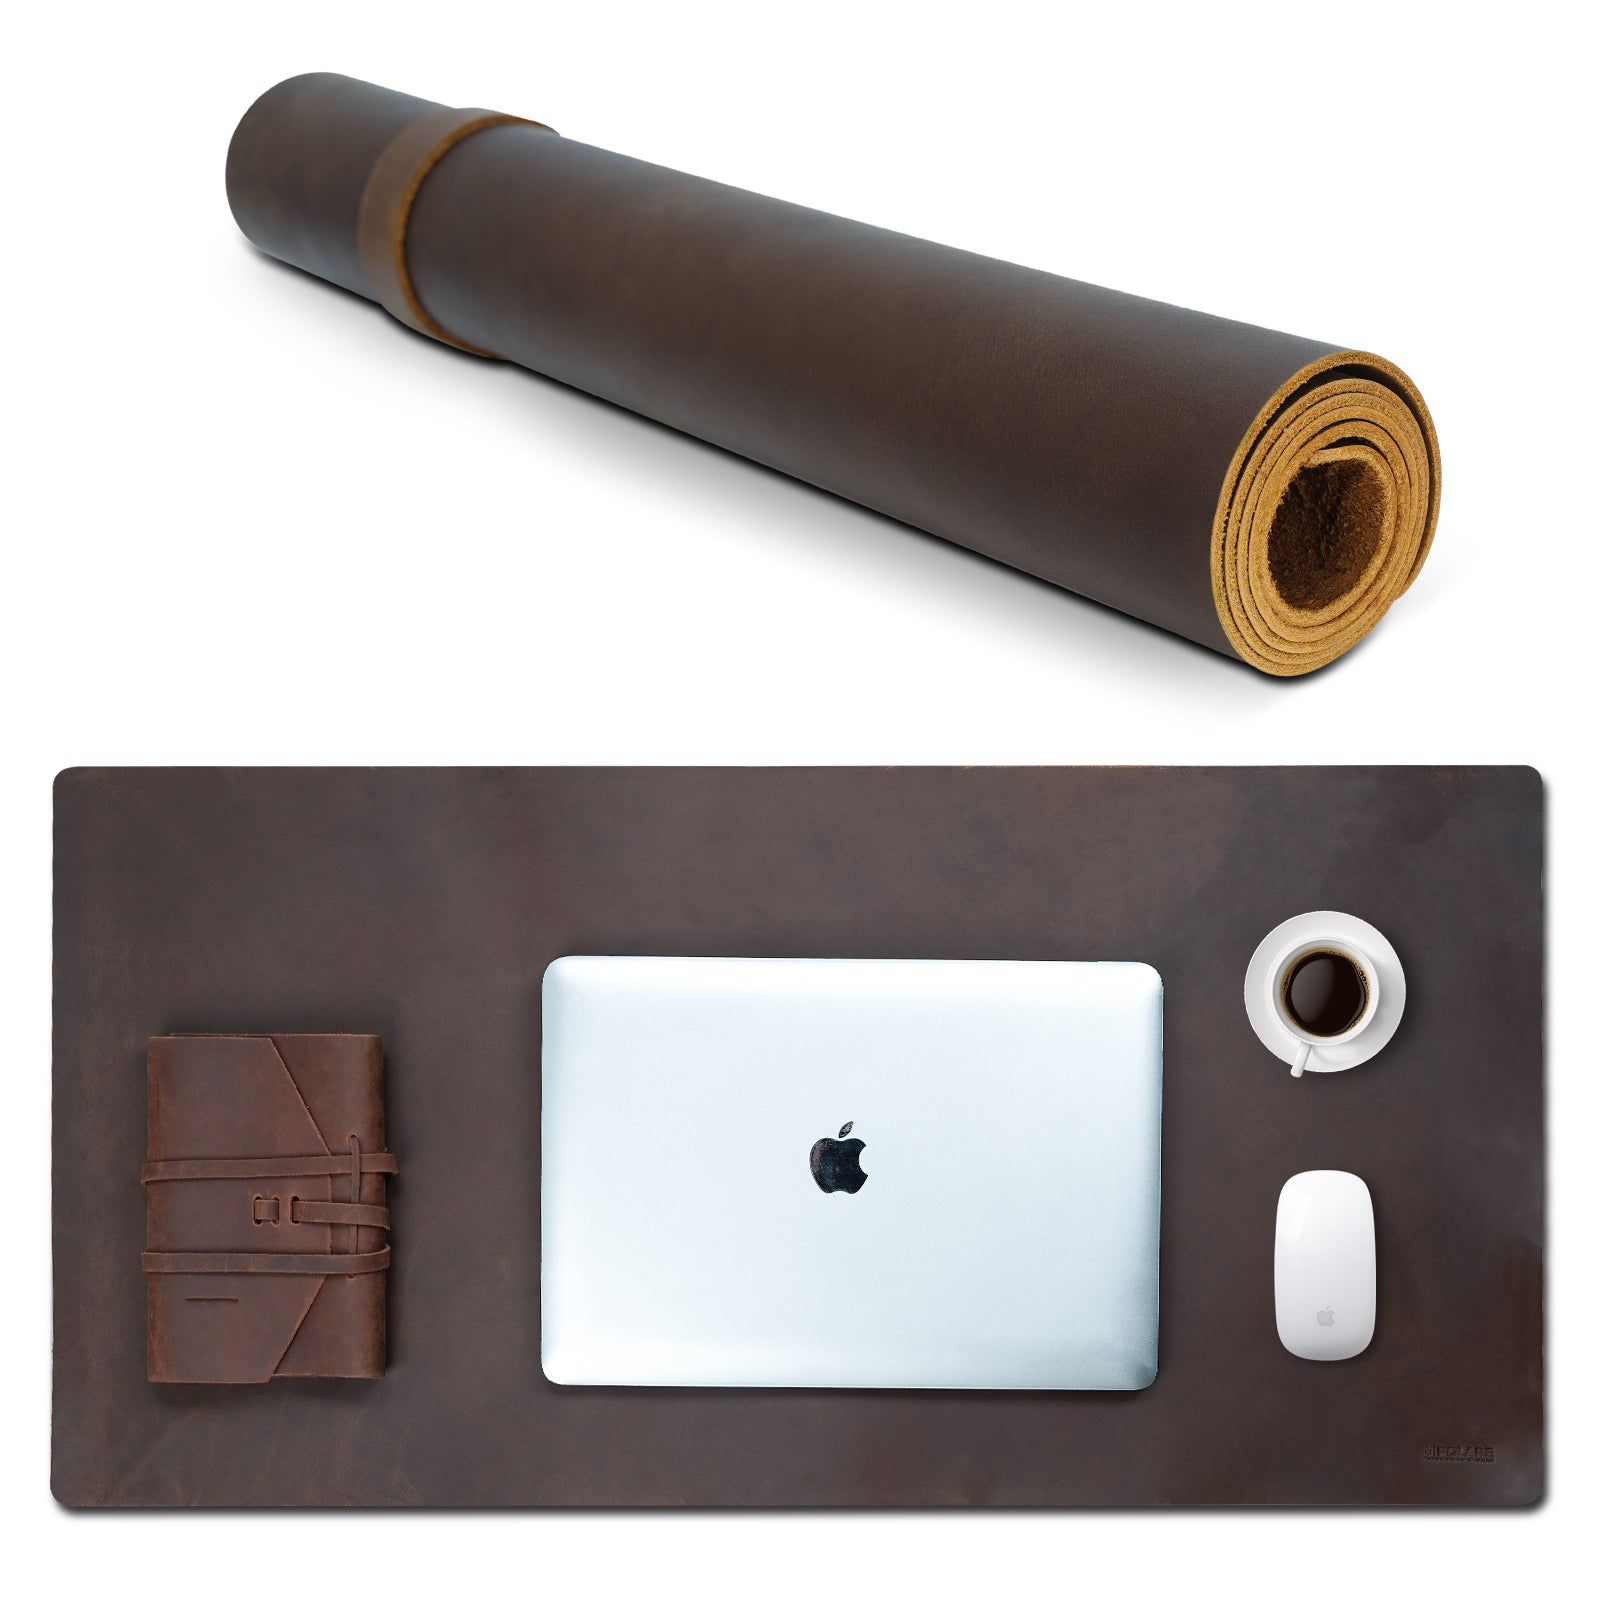  Leather Desk Pad Protector,Mouse Pad,Office Desk Mat